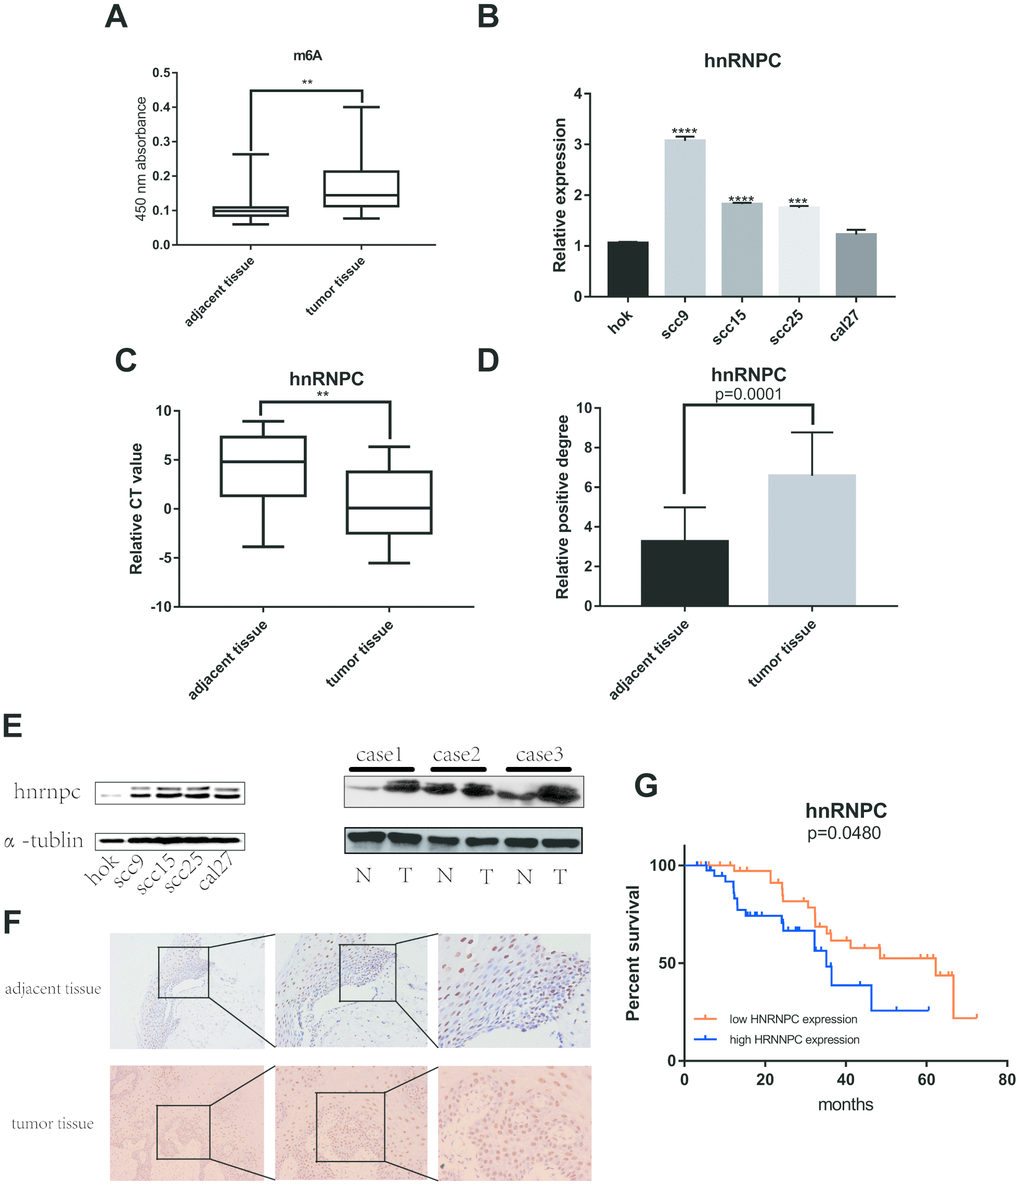 M6A and HNRNPC expression level in OSCC. (A) M6A level was detected in 80 pairs OSCC tissues and adjacent normal tissues (p=0.0047). (B, C) MRNA level of HNRNPC was detected in 4 OSCC cell lines (scc9 pD) Statistical analysis of immunohistochemistry in OSCC tissues (p=0.0001). (E) HNRNPC protein level in OSCC cell lines and tissues. (F) The represent results of immunohistochemistry. (G) Survival analysis of HNRNPC was performed in 80 OSCC samples from Nanfang Hospital (p=0.048).